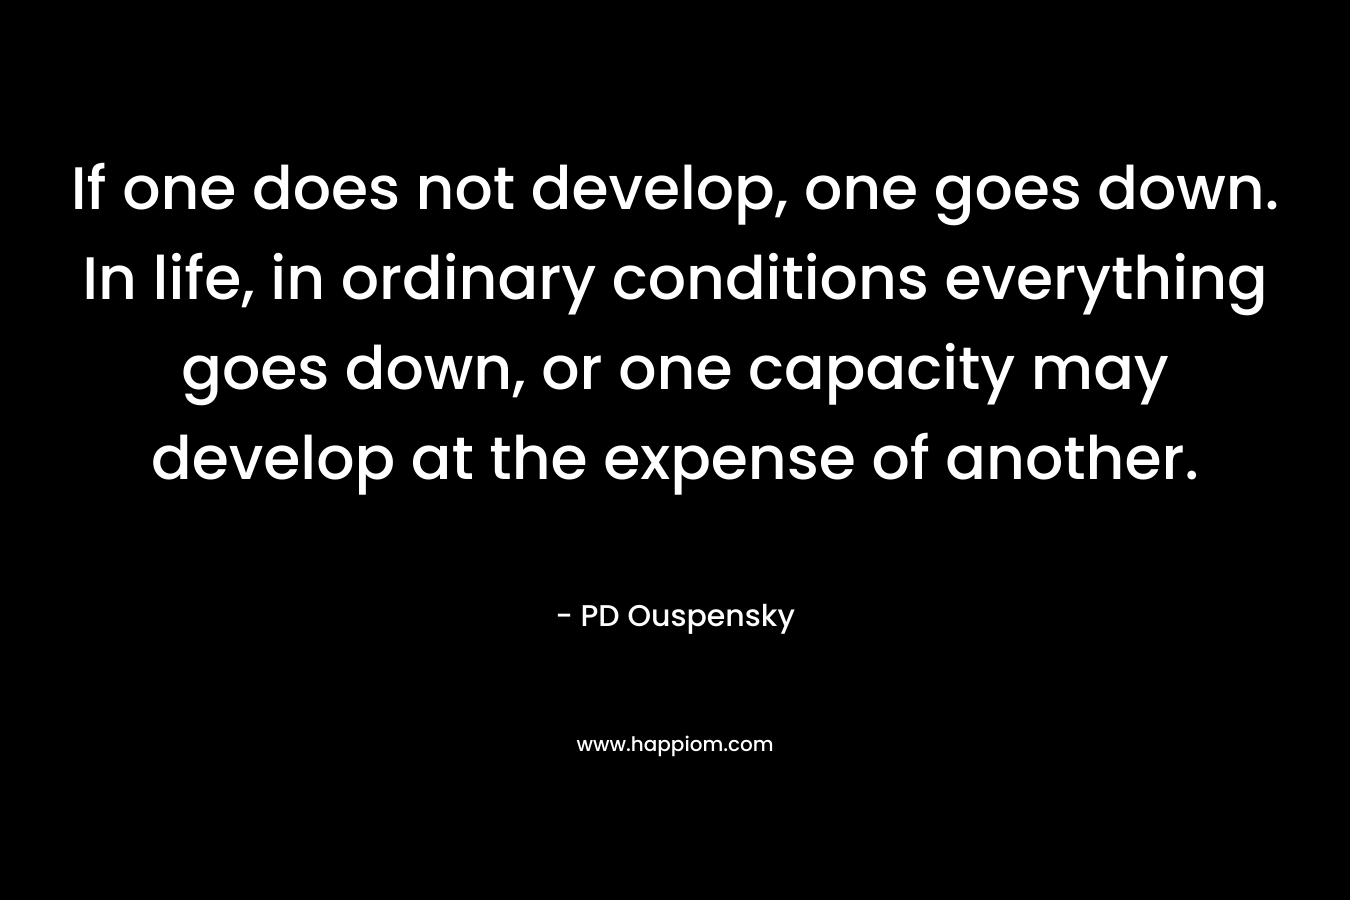 If one does not develop, one goes down. In life, in ordinary conditions everything goes down, or one capacity may develop at the expense of another.